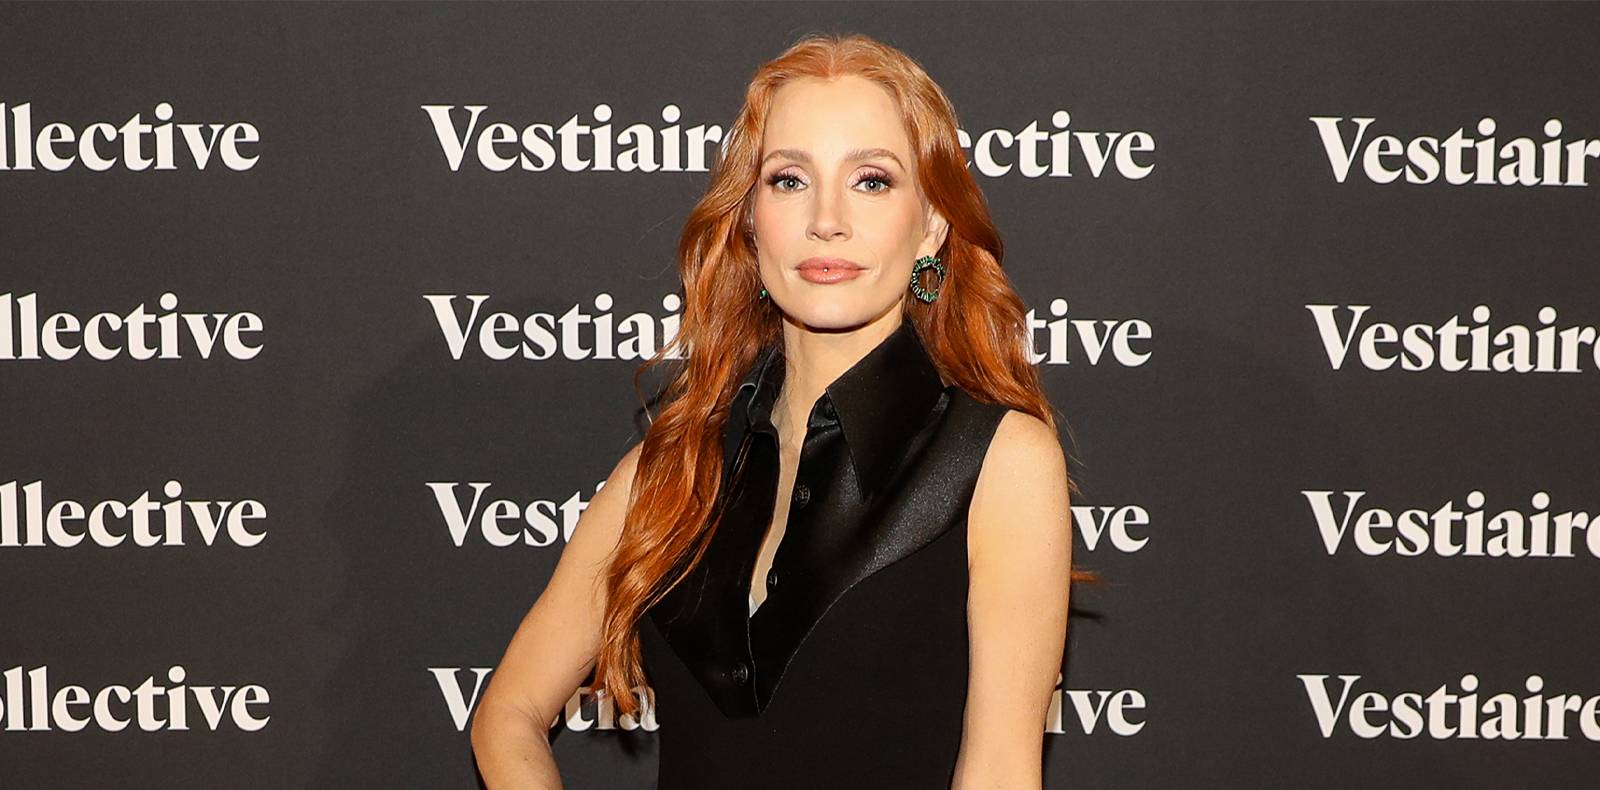 Jessica Chastain, Vestiaire Collective, Vide-dressing, Gucci, Givenchy